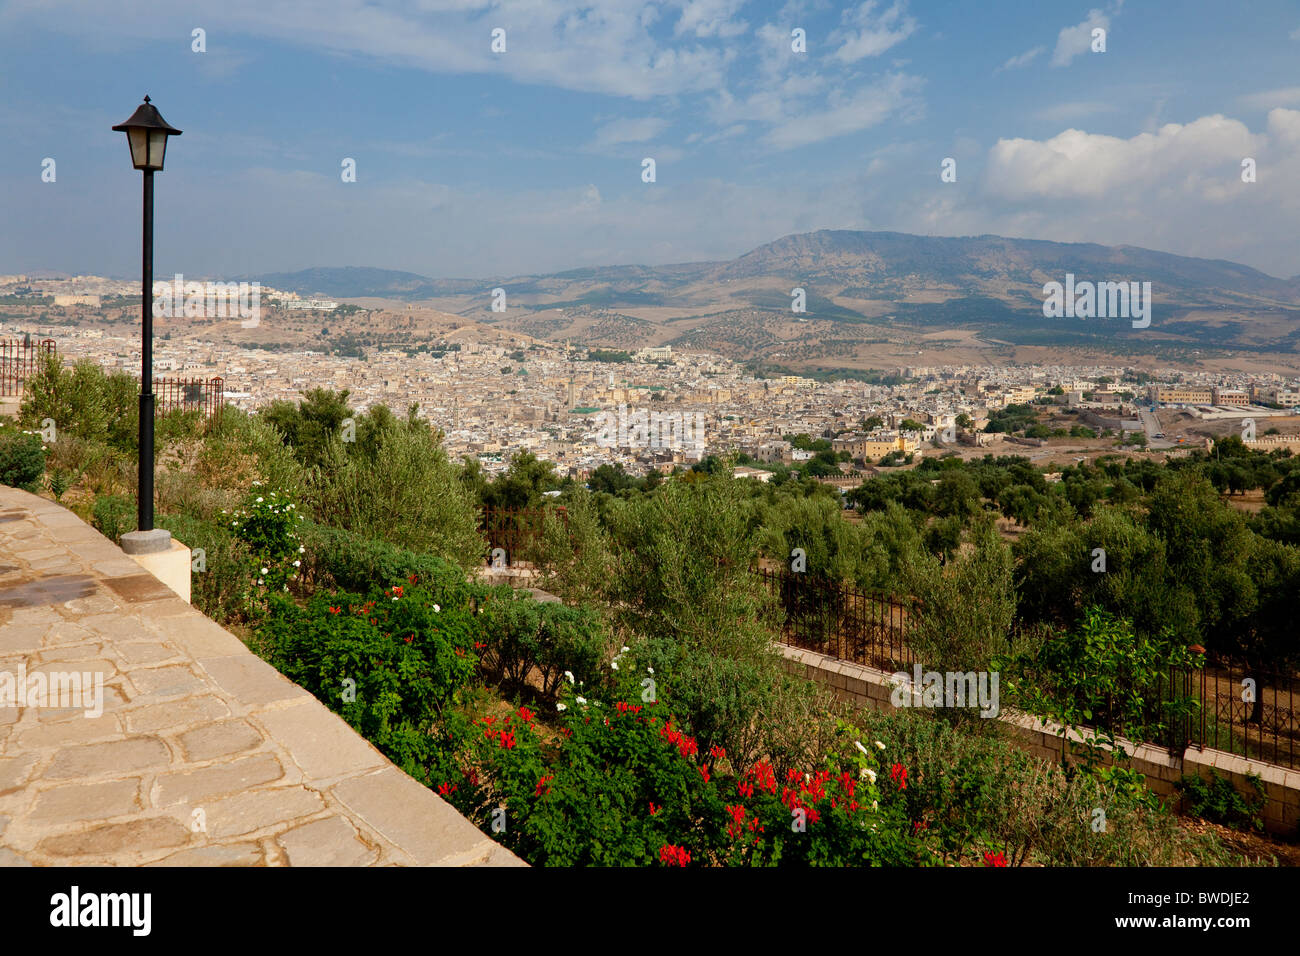 A military castle and a view of Fes, Morocco. Stock Photo